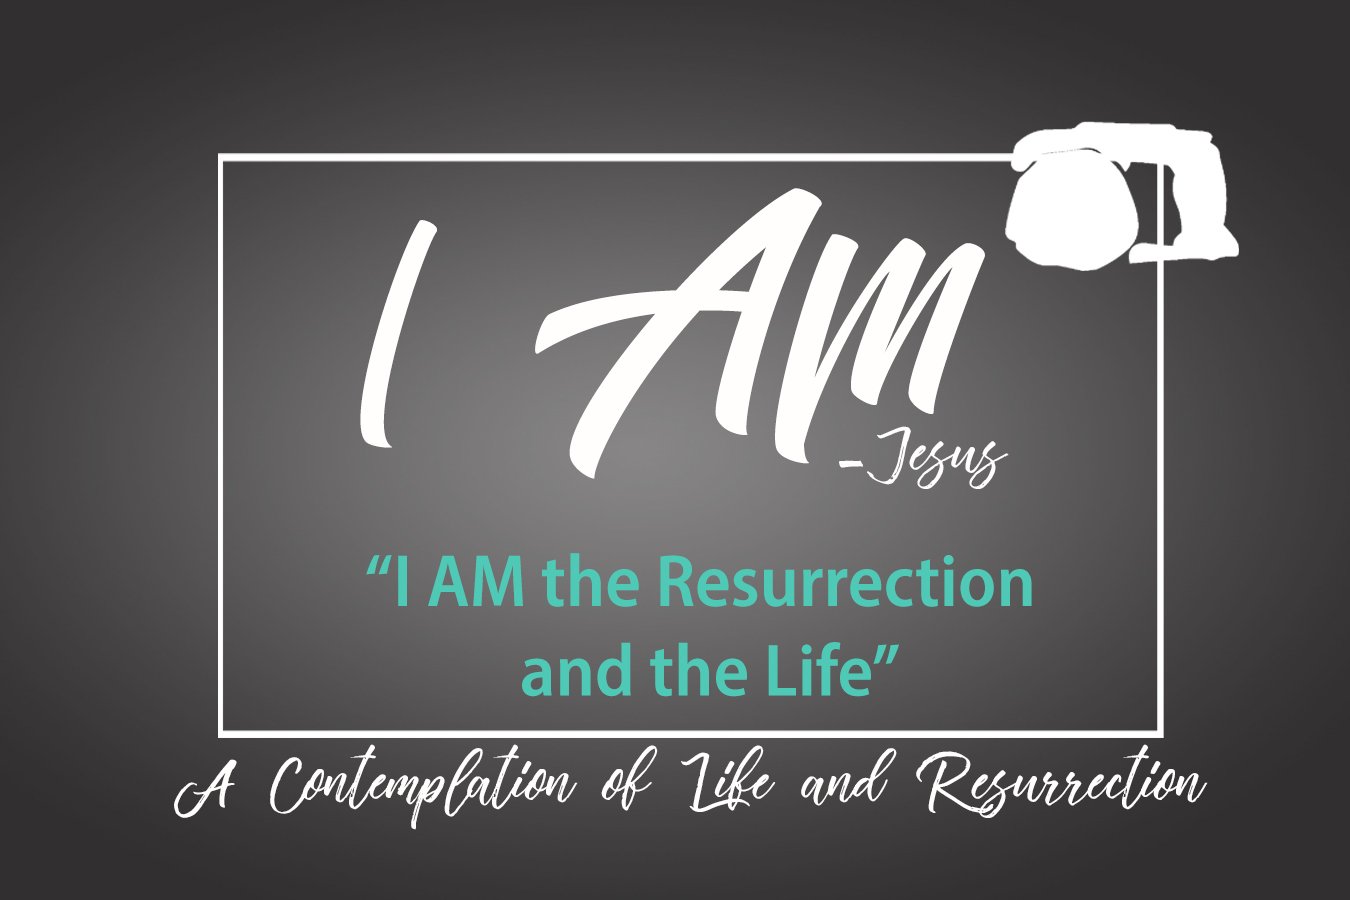 I AM the Resurrection and the Life